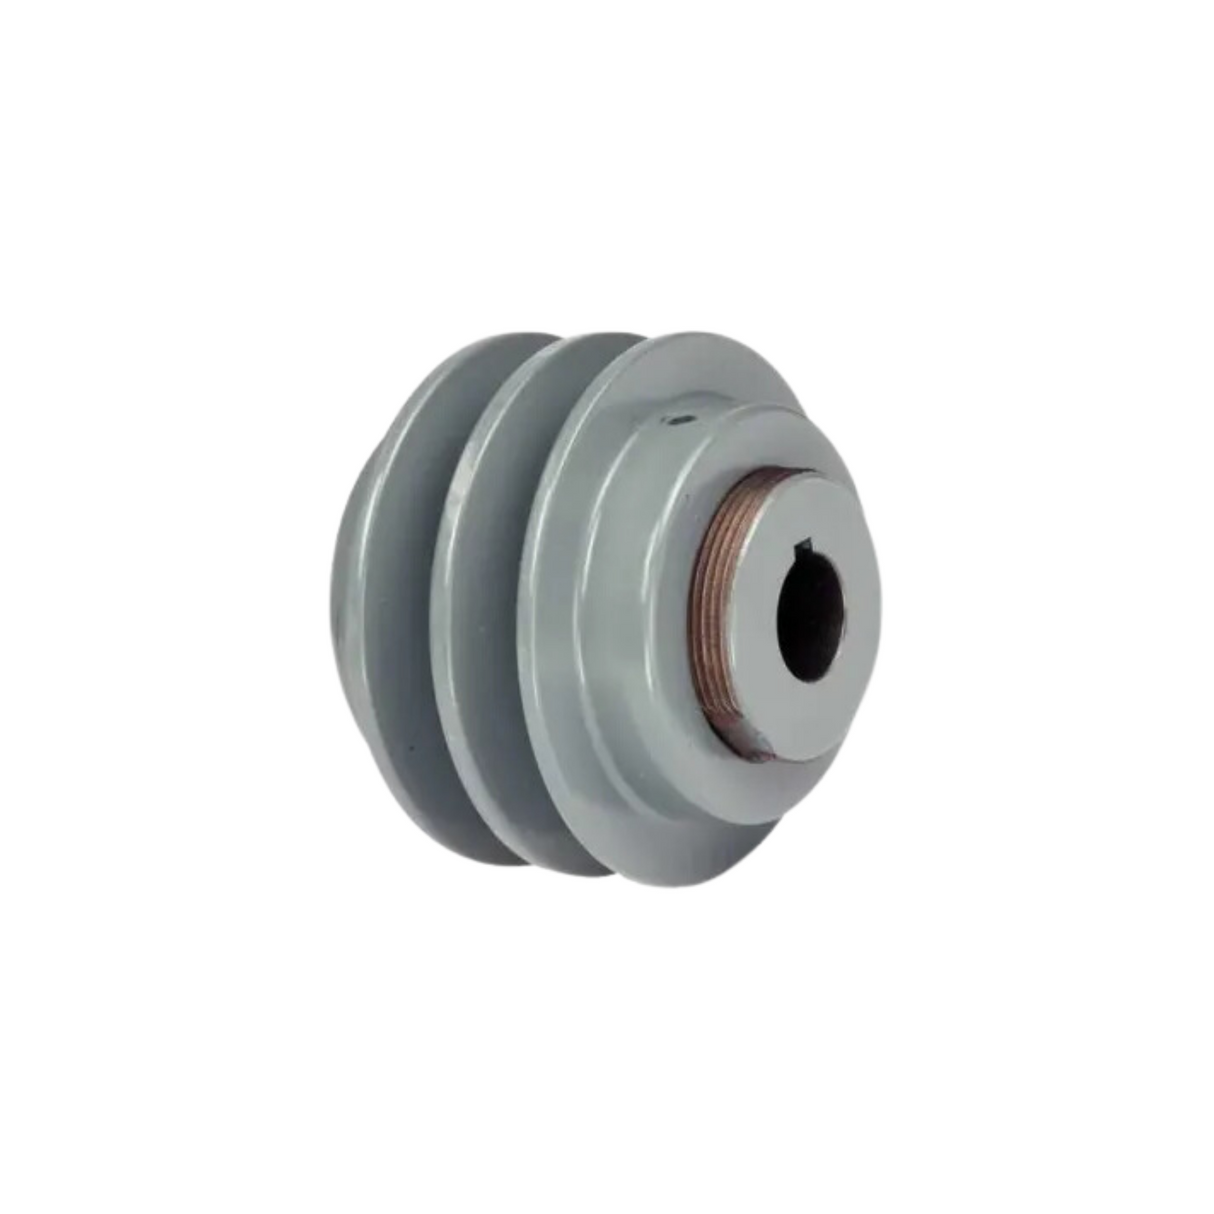 Champion 110289 Motor Pulley (D8350 X 7/8")